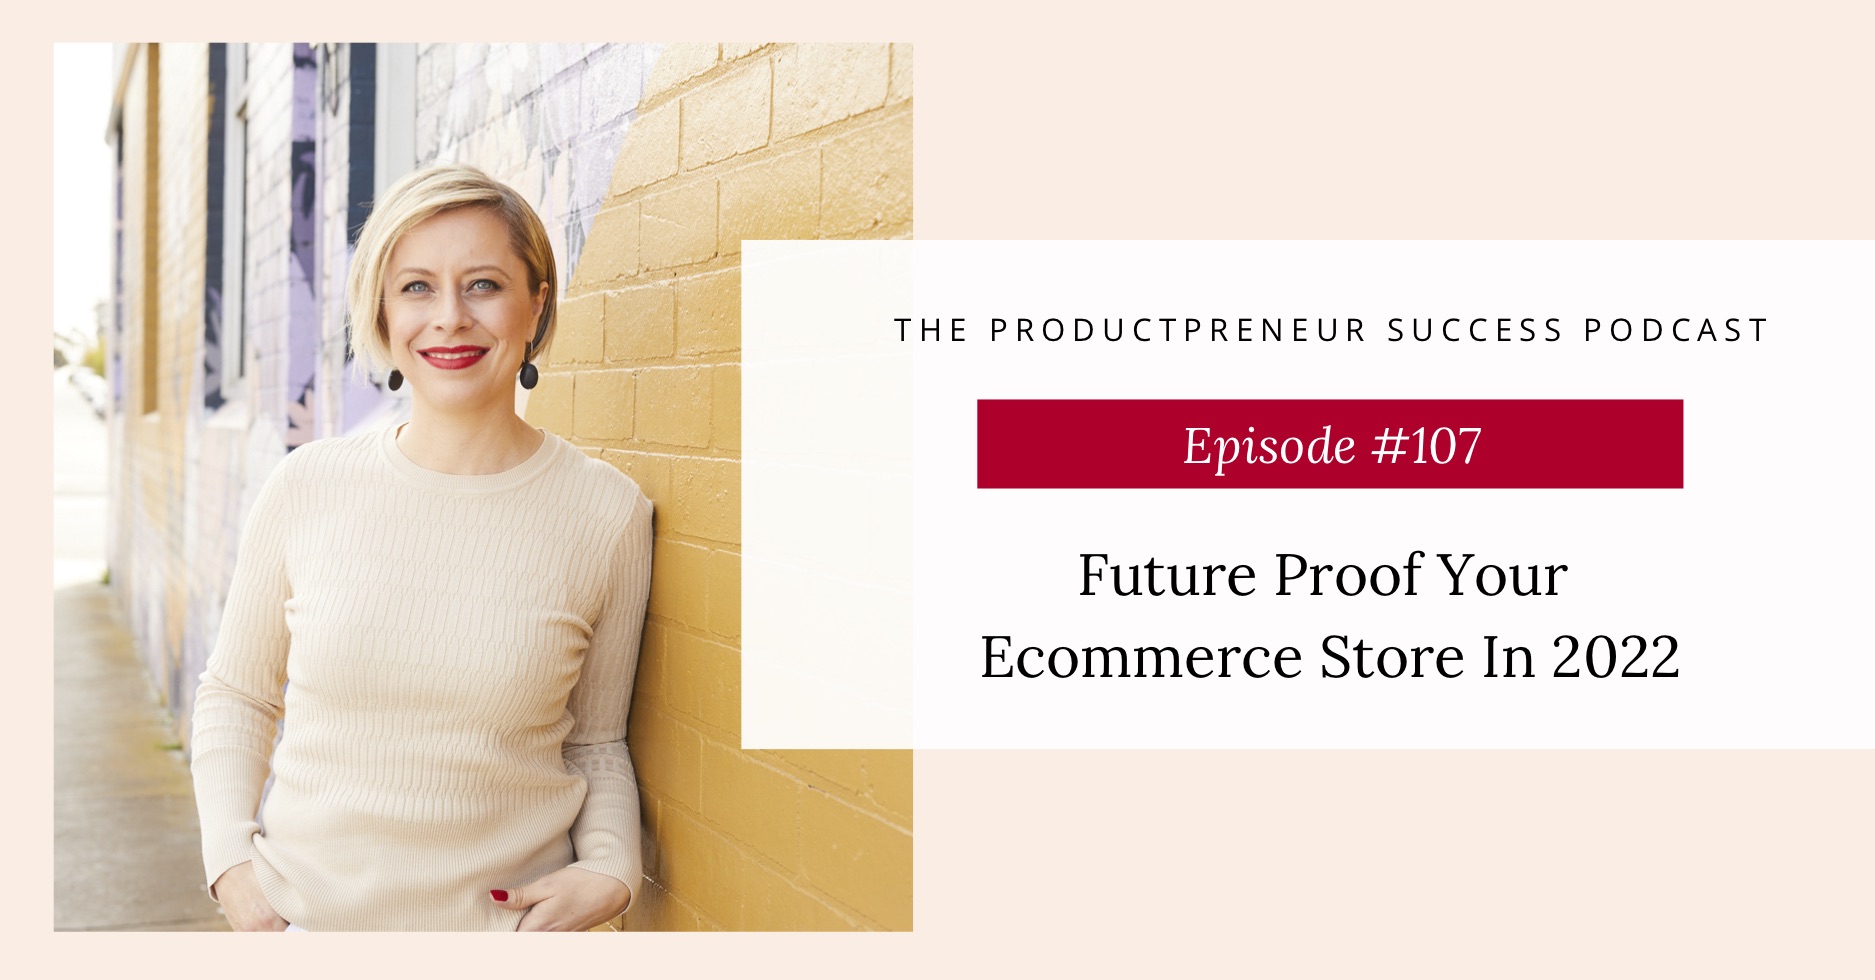 How to future proof your ecommerce store in 2022